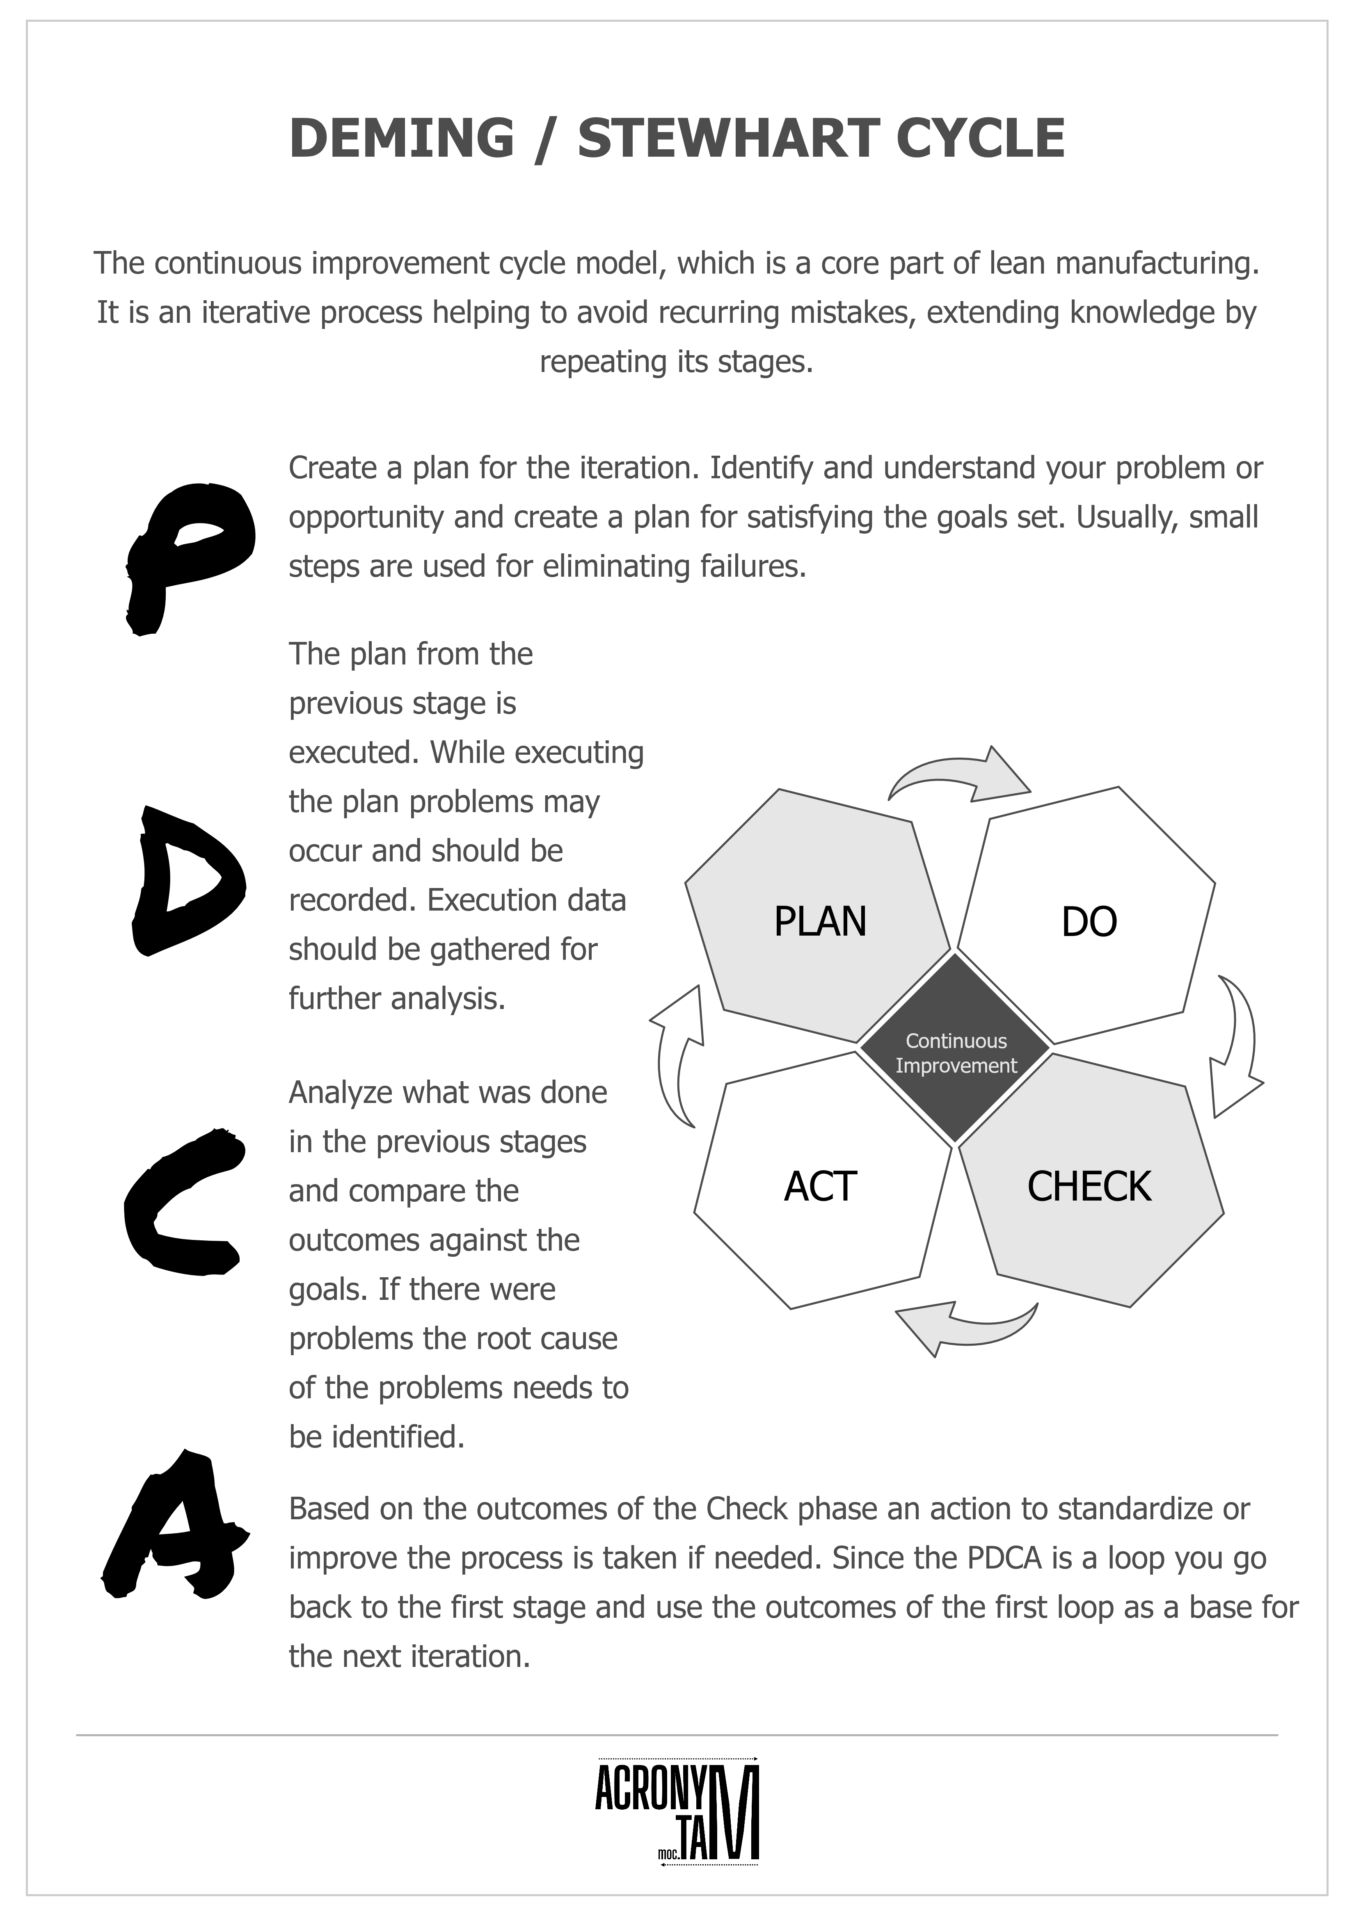 PDCA / Deming cycle